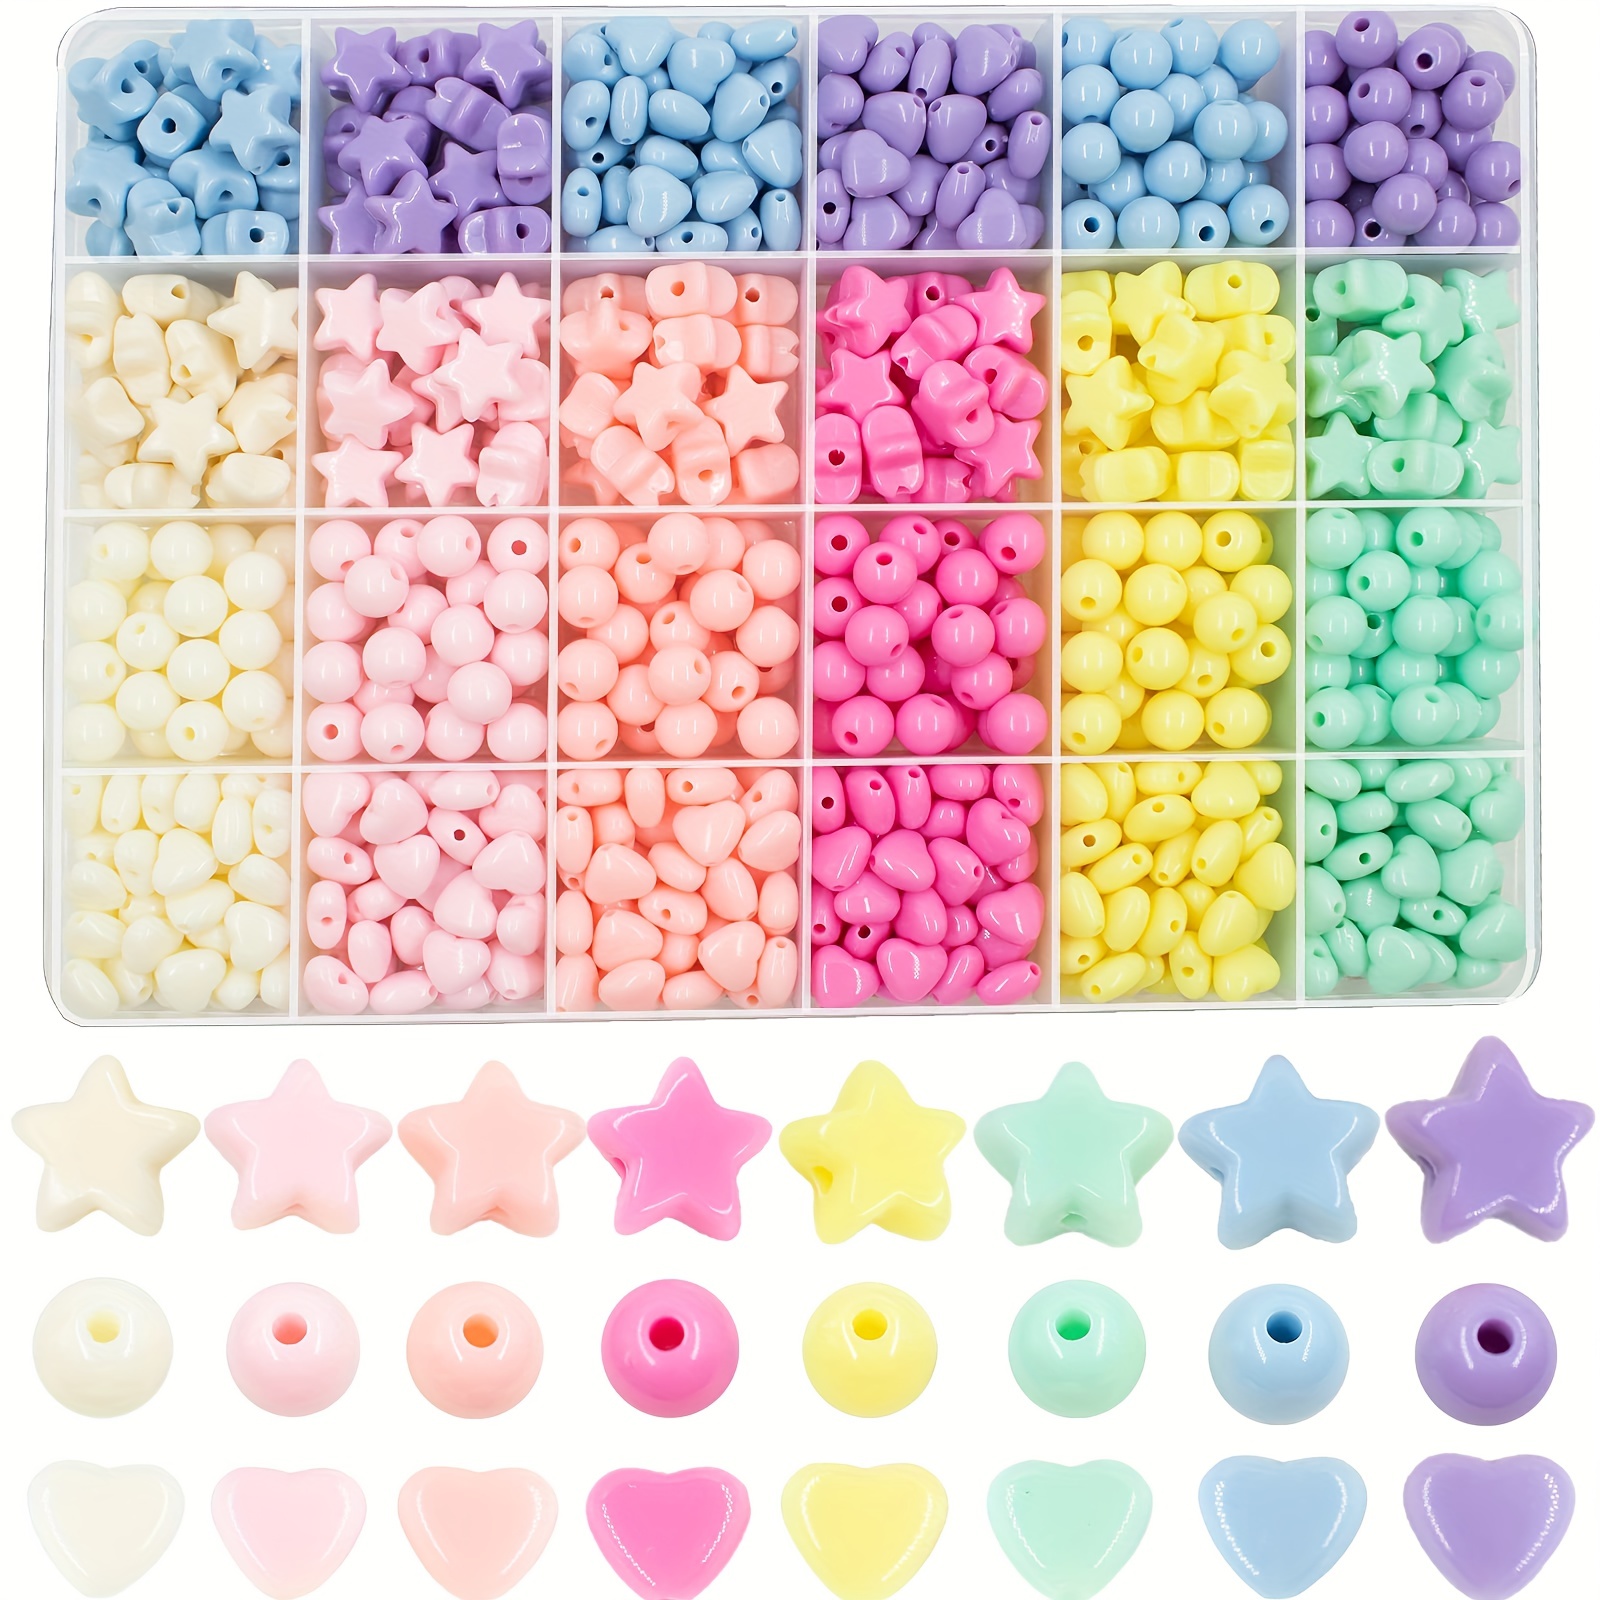  10Pcs Heart Beads Heart Spacer Beads Acrylic Loose Beads Heart  Shaped DIY Beads For Making Bracelet Necklace Earrings Heart Spacer Beads :  Arts, Crafts & Sewing